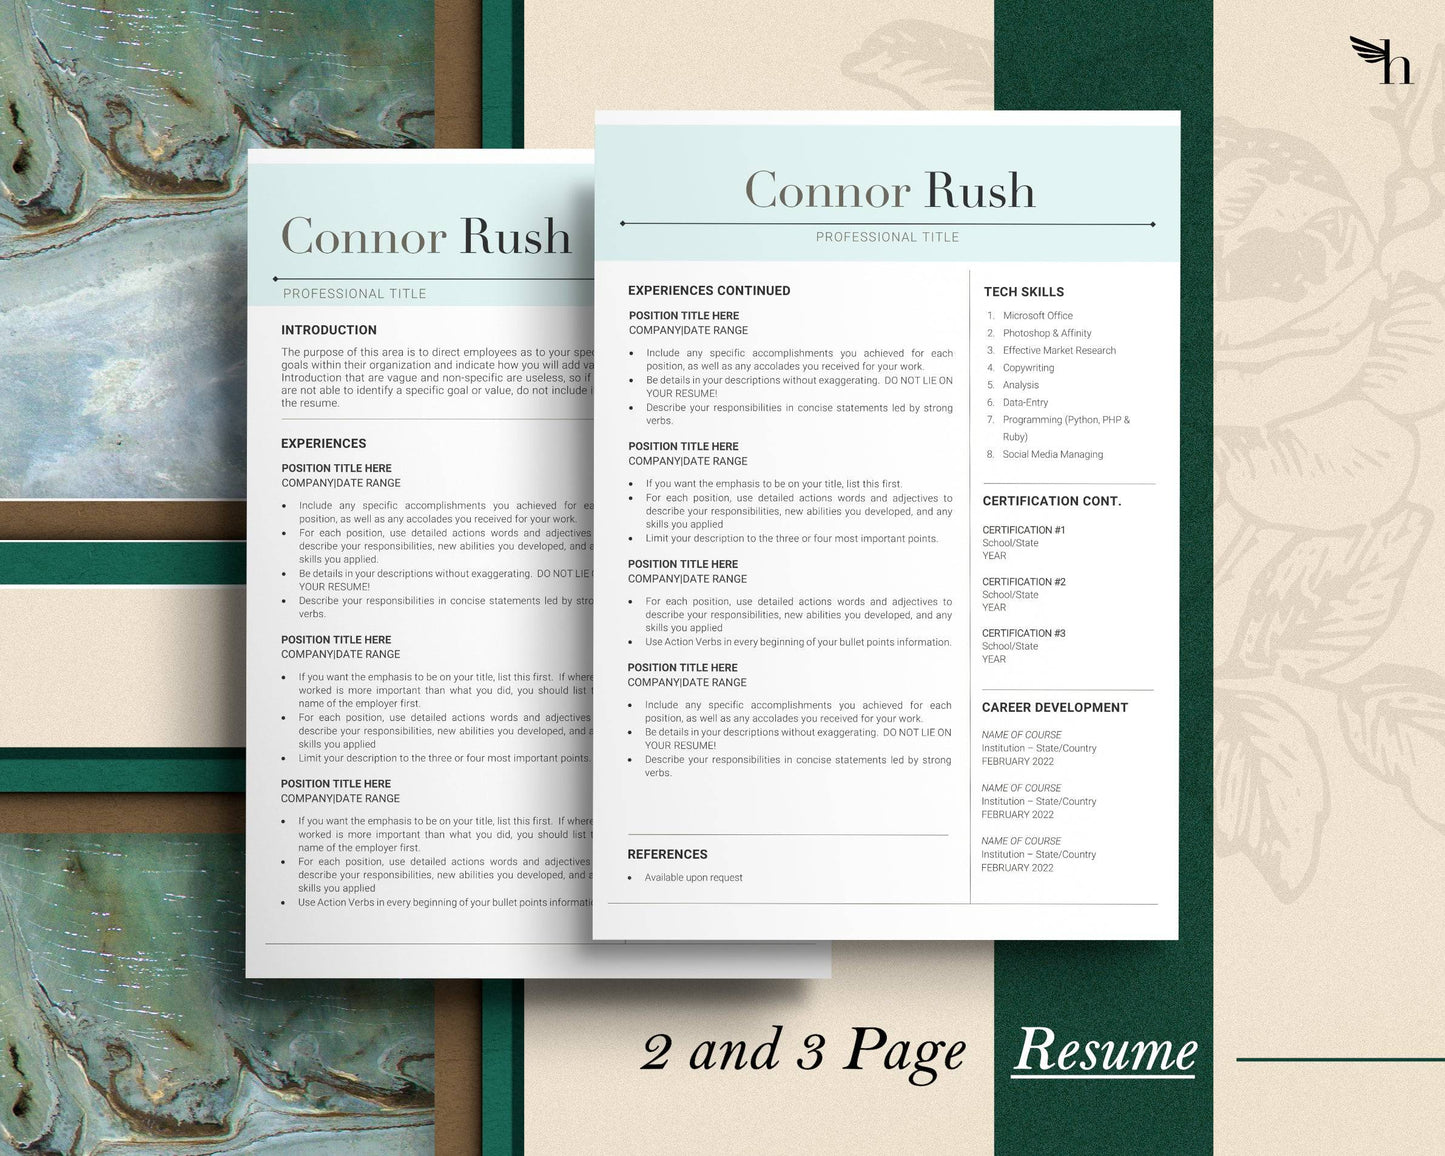 Professional Resume Template for Word, Pages - "Connor" - Hired Guardian